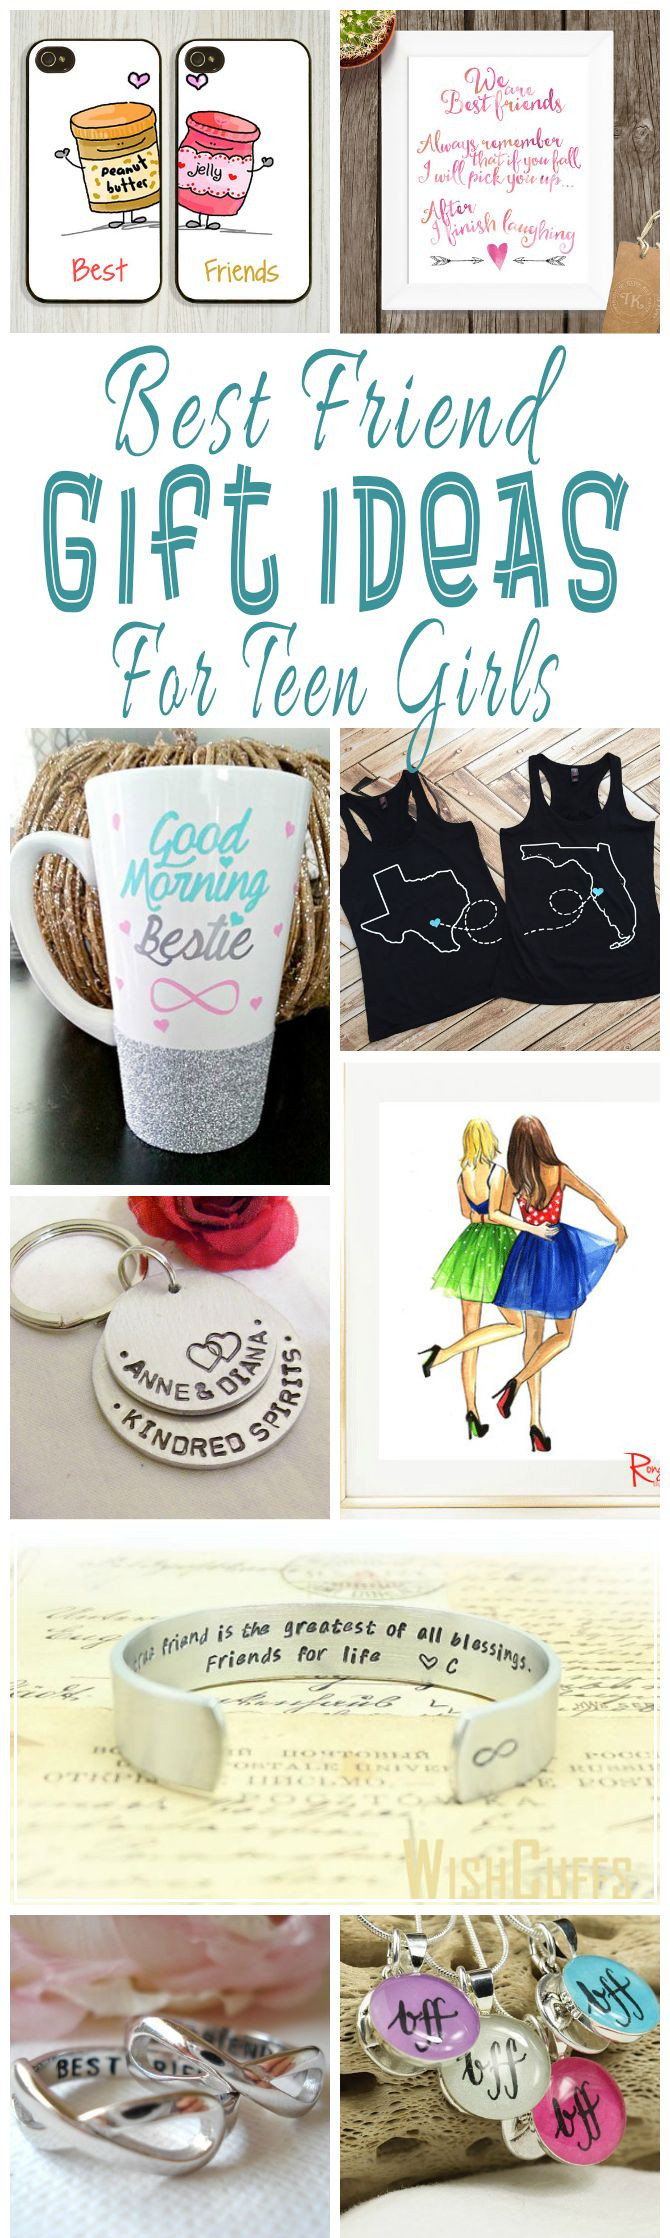 Fun Gift Ideas For Girls
 Pin on Goals